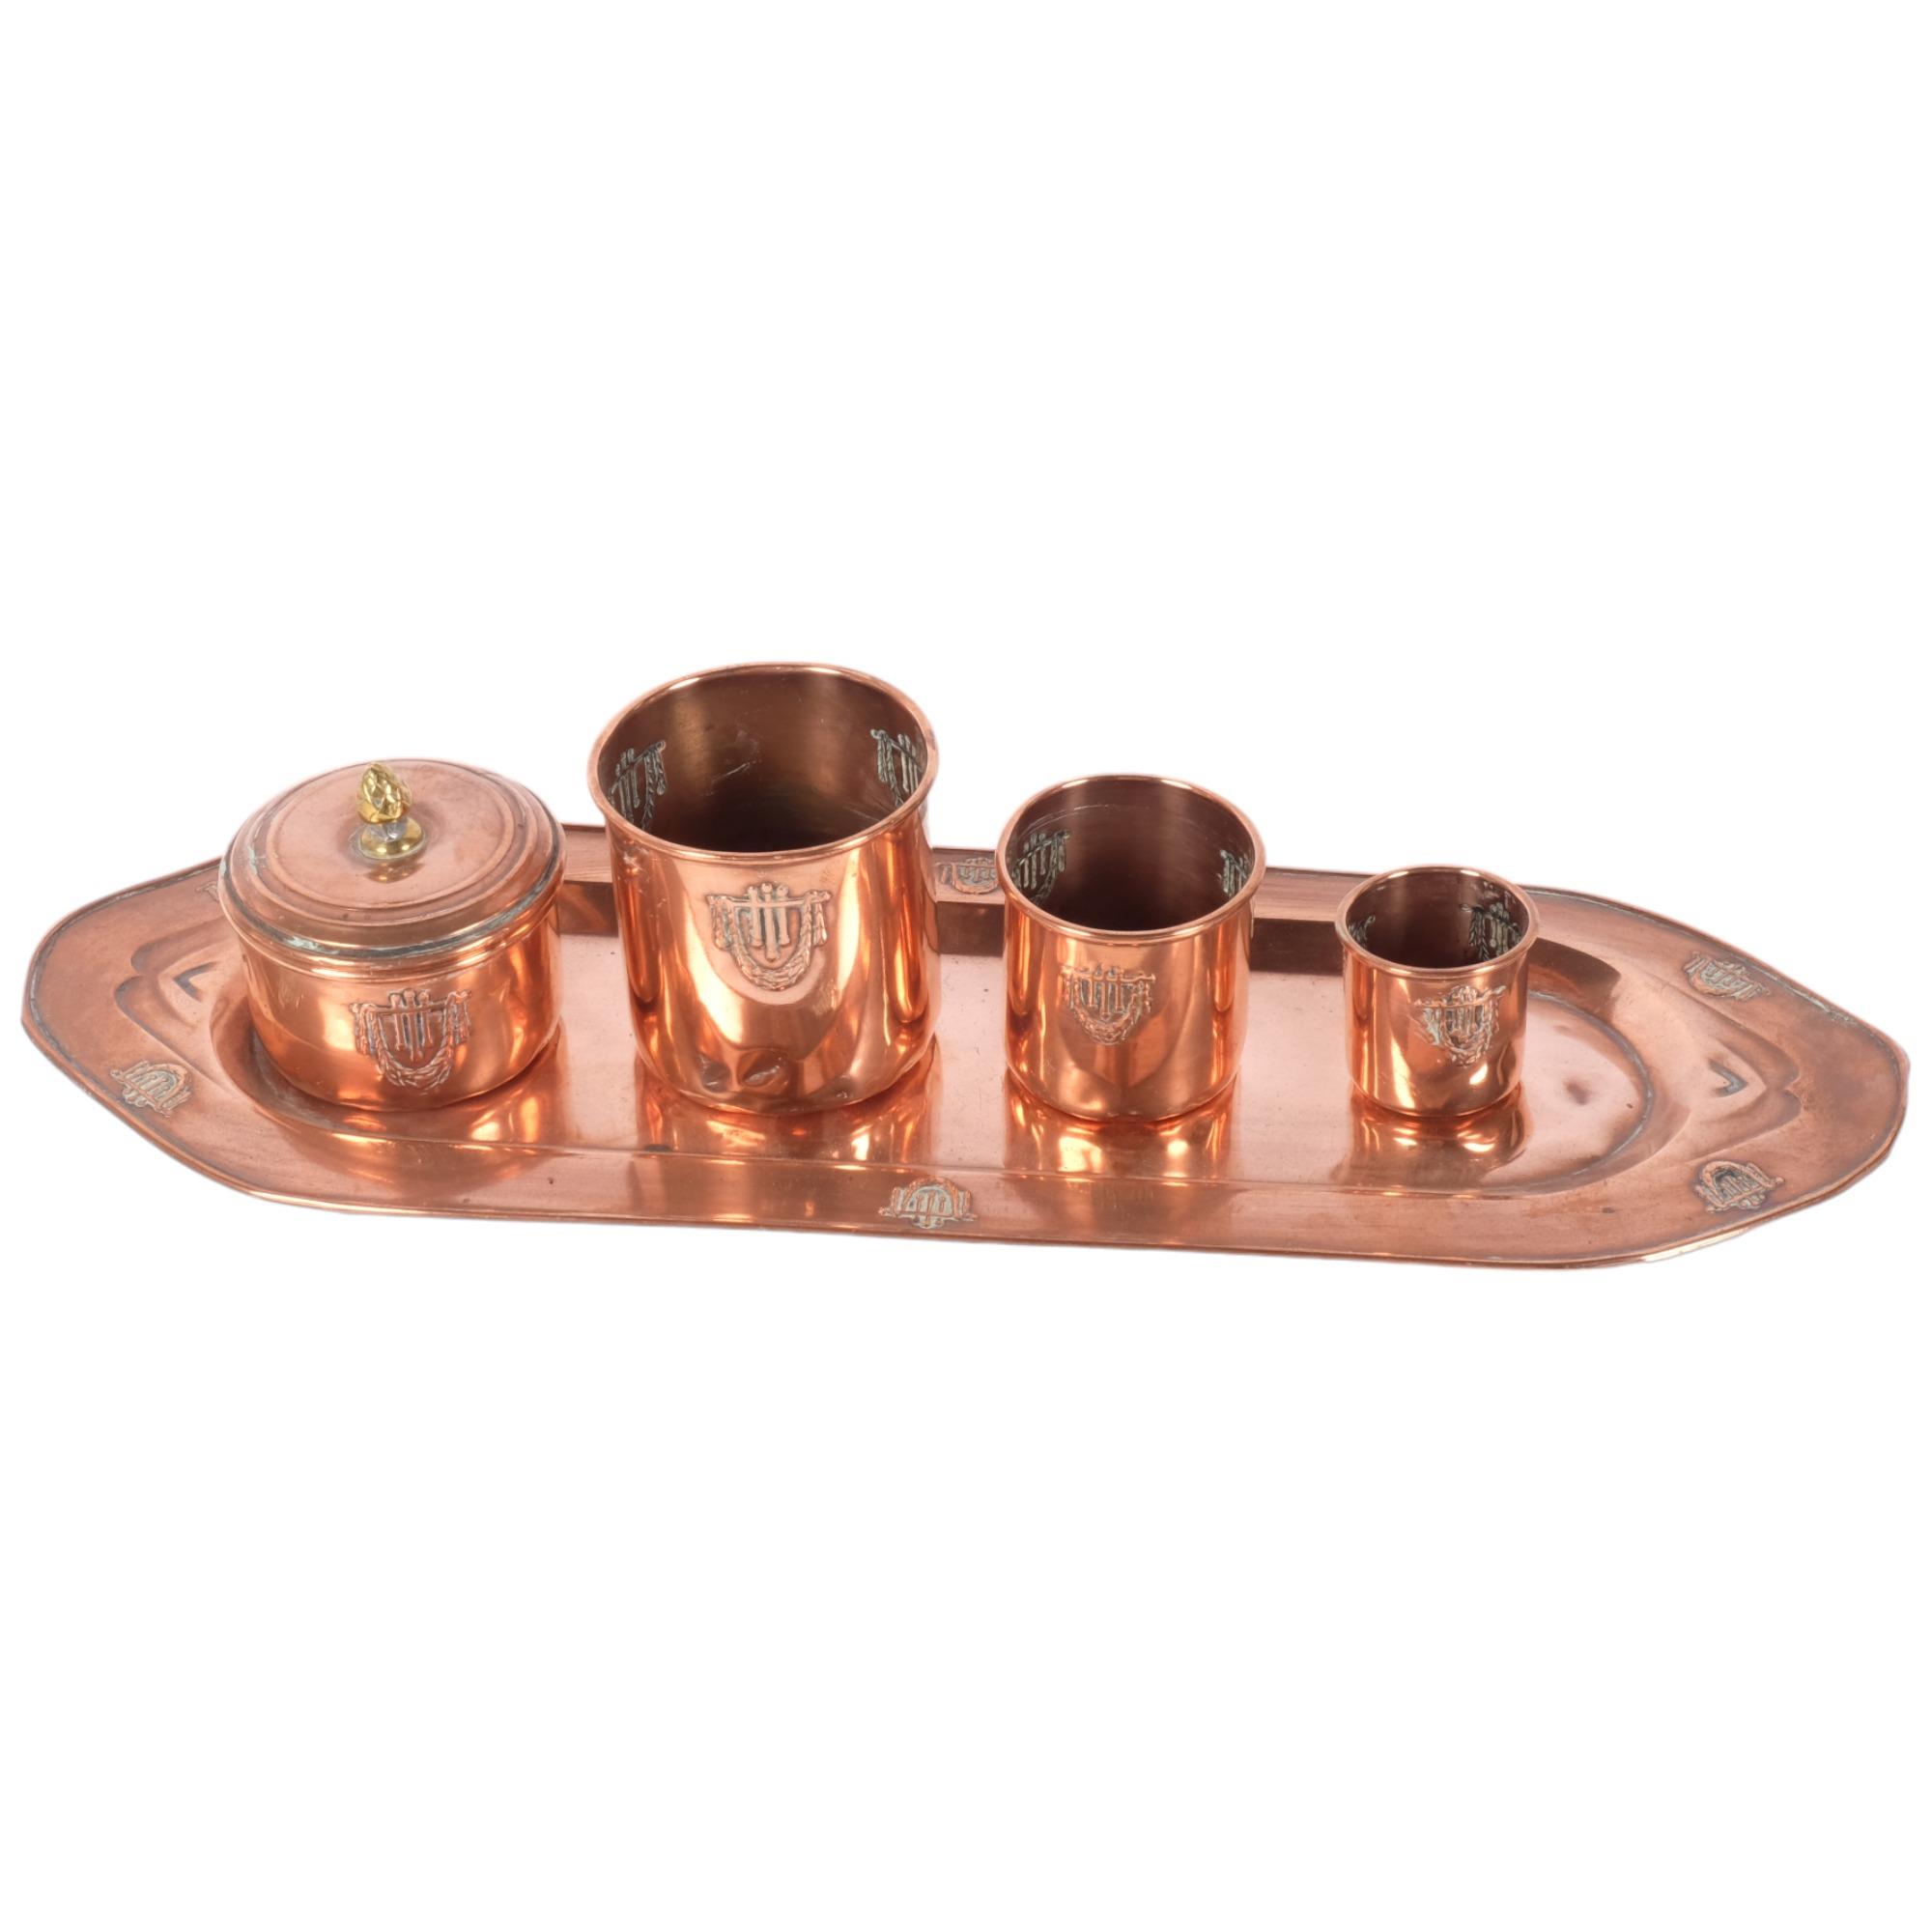 A French Art Nouveau copper tray of rectangular form, a graduated set of 3 matching beakers, and a